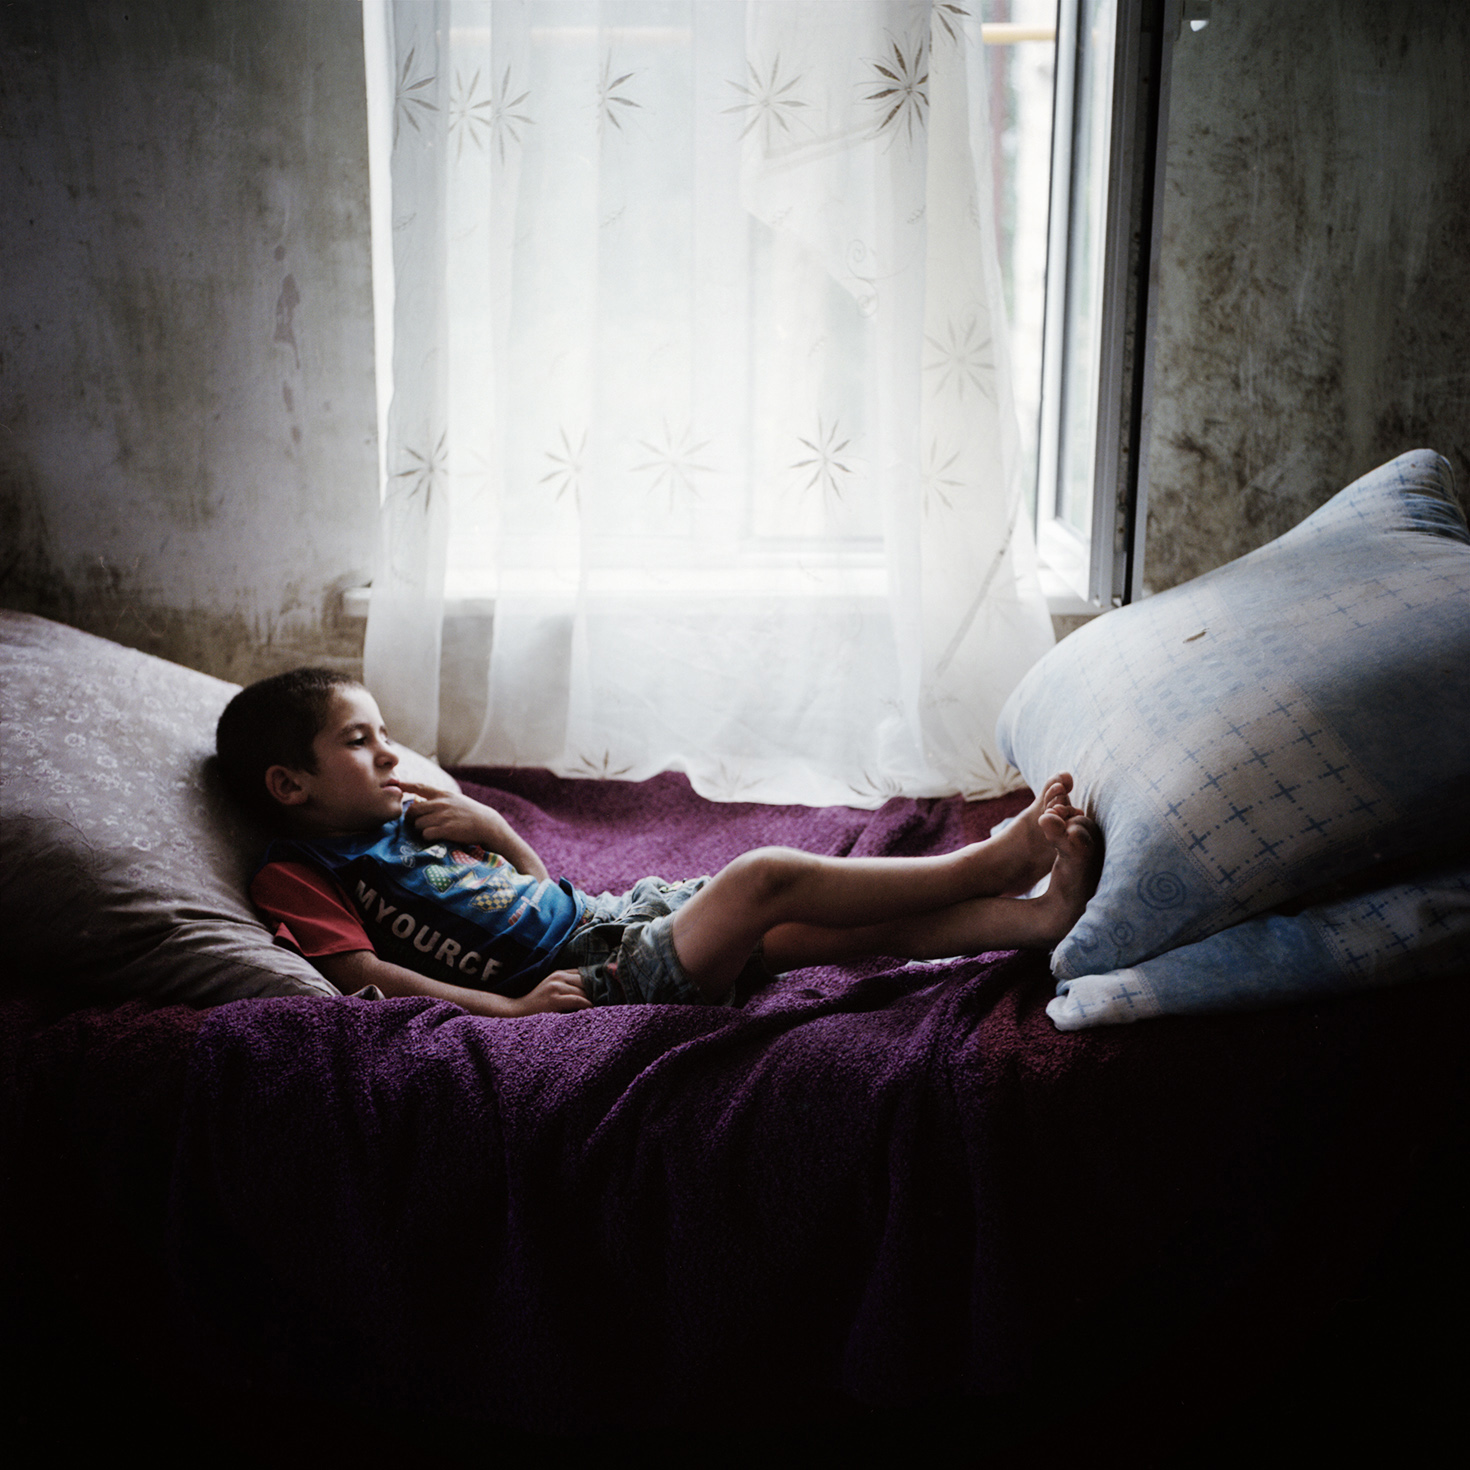  In Chouchi, a little boy from a large family in his bed, thoughtfully. 